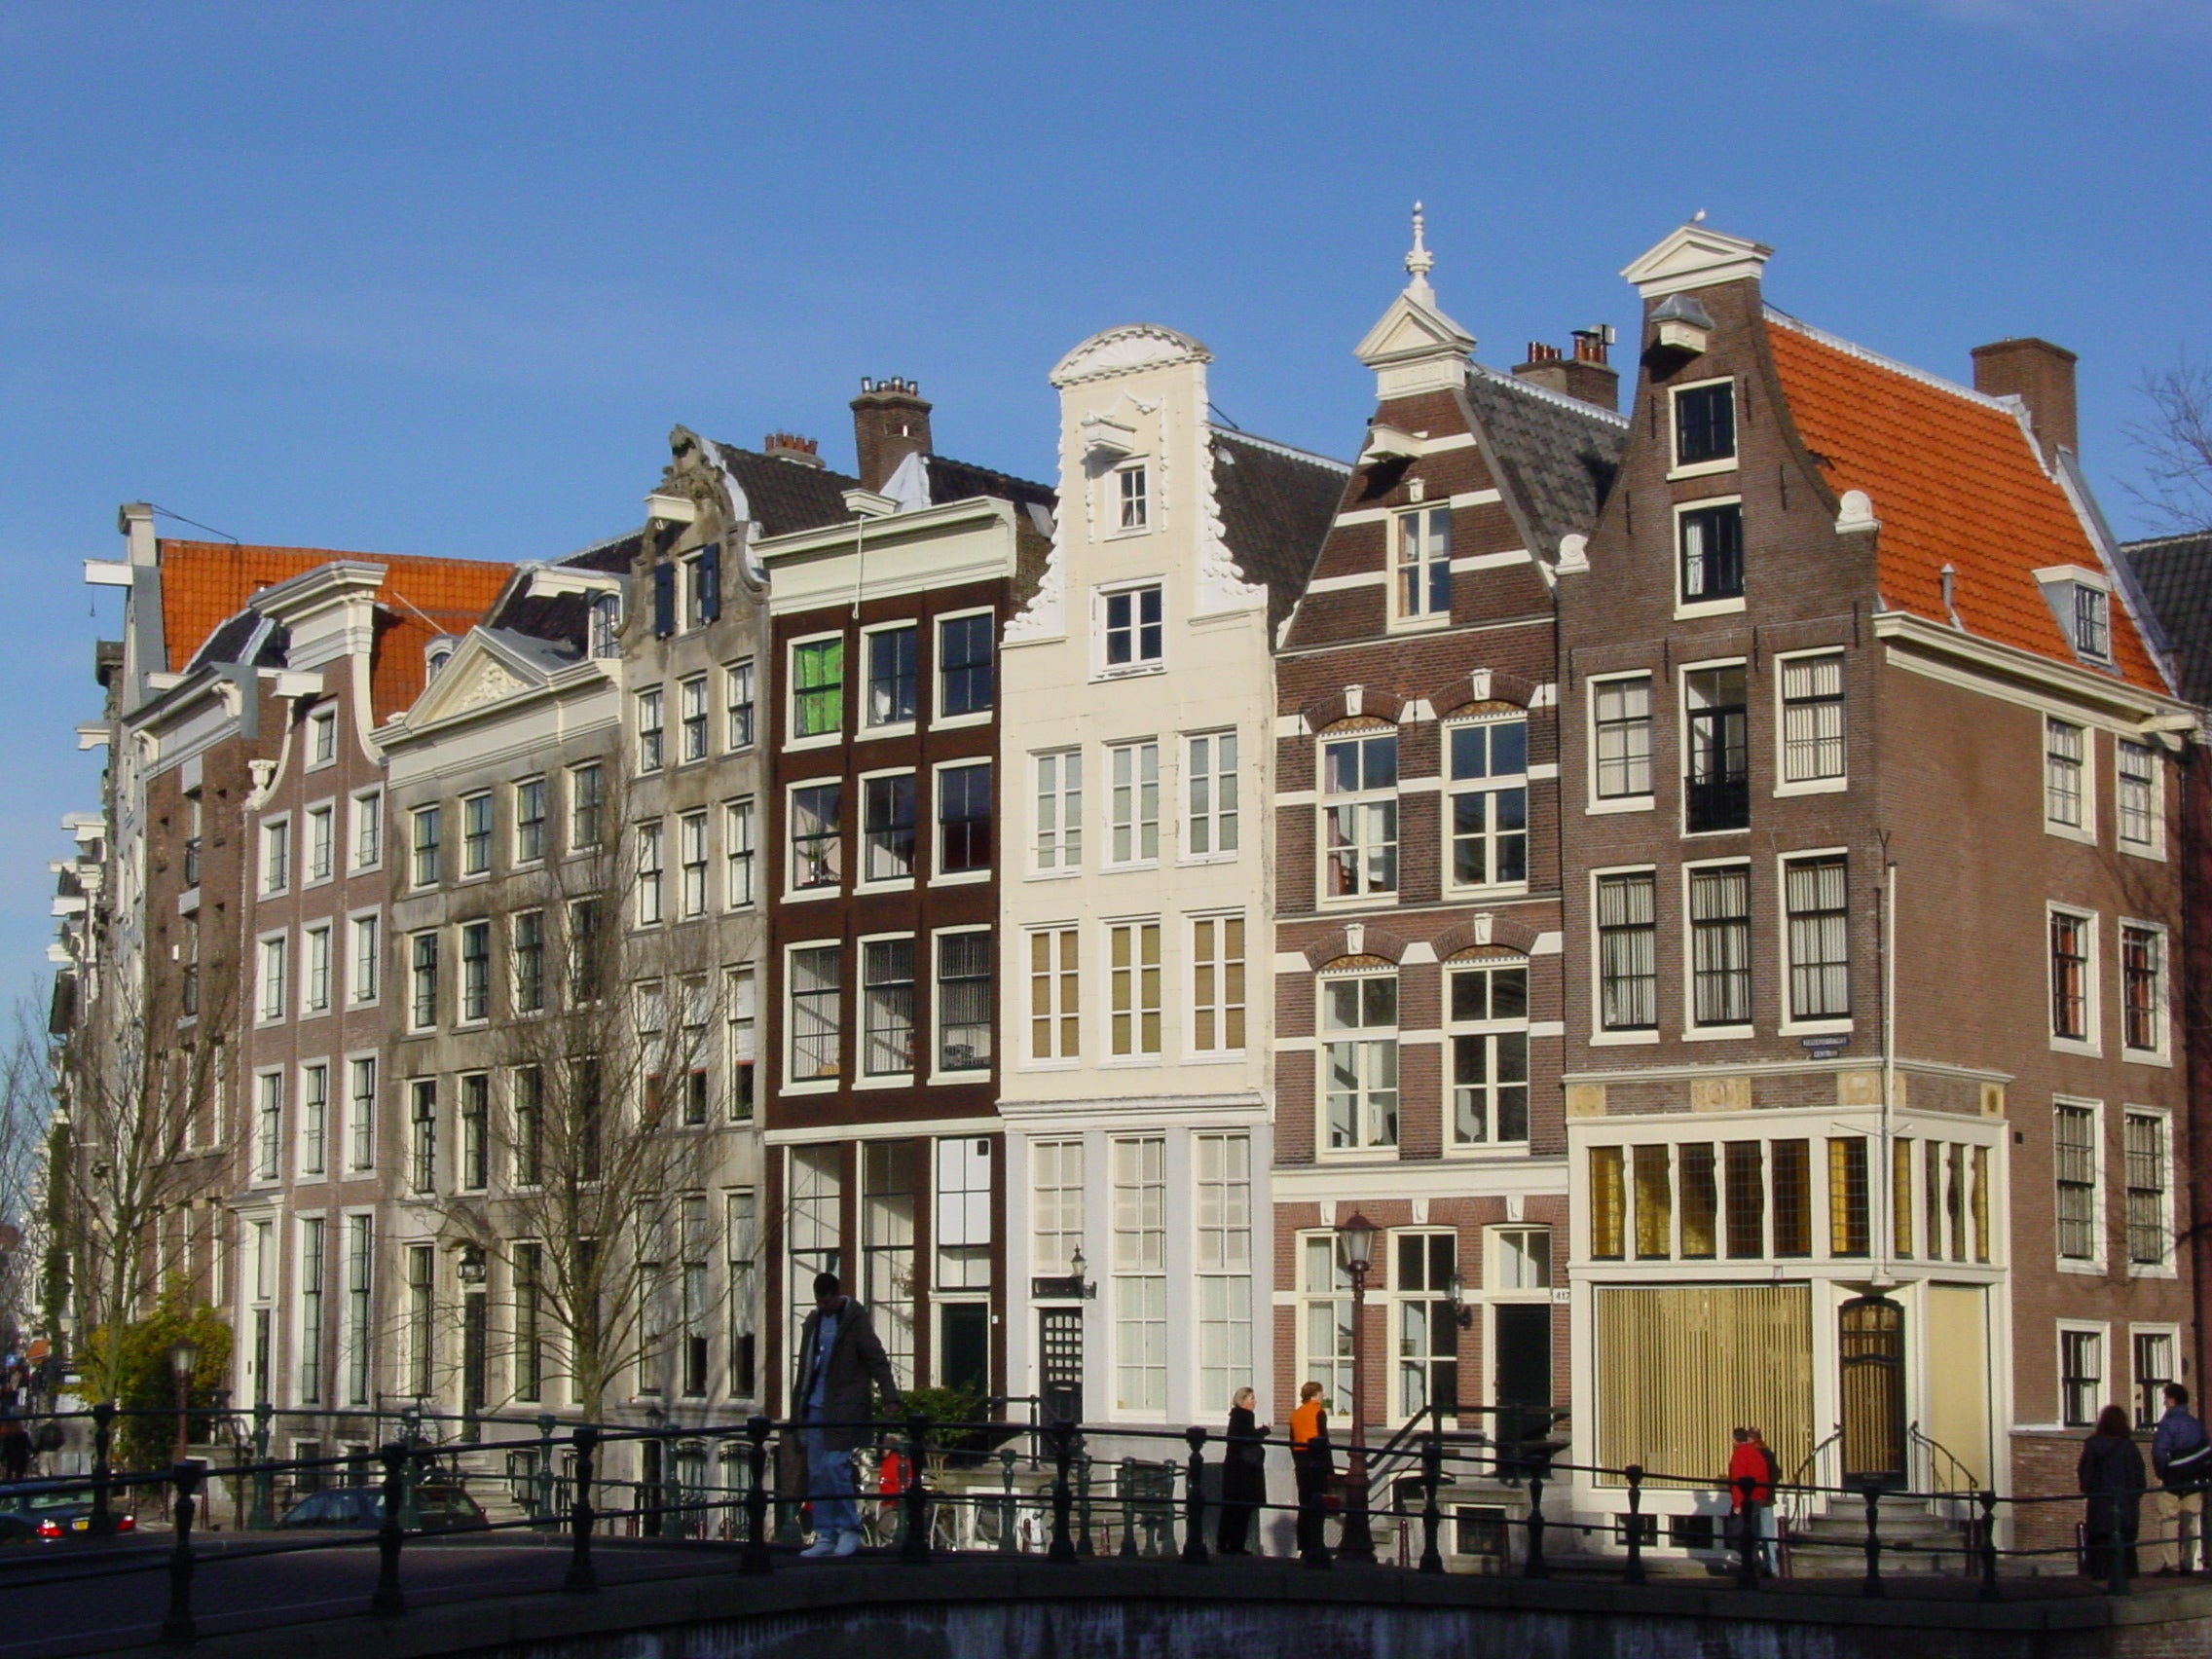 Distant dream: Canal houses in Amsterdam